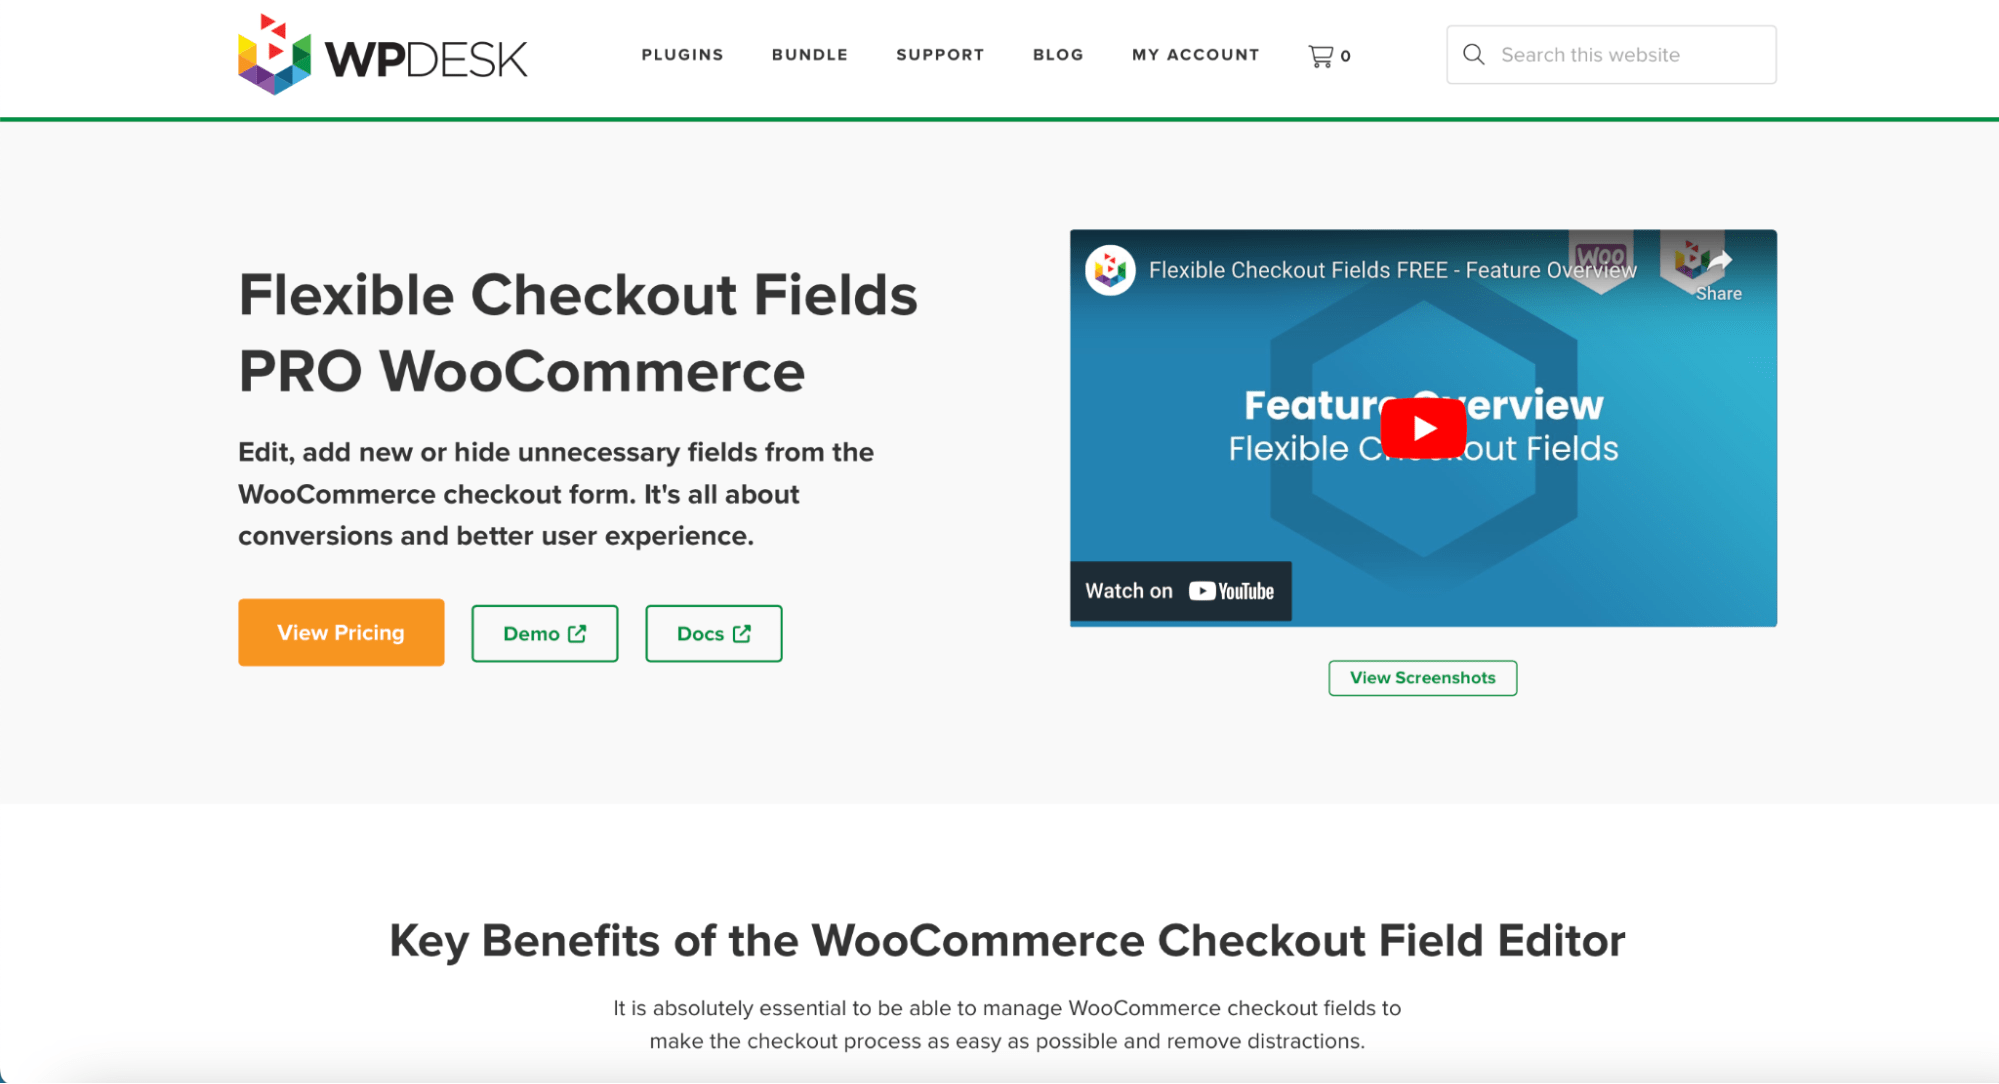 WooCommerce Flexible Checkout Fields homepage